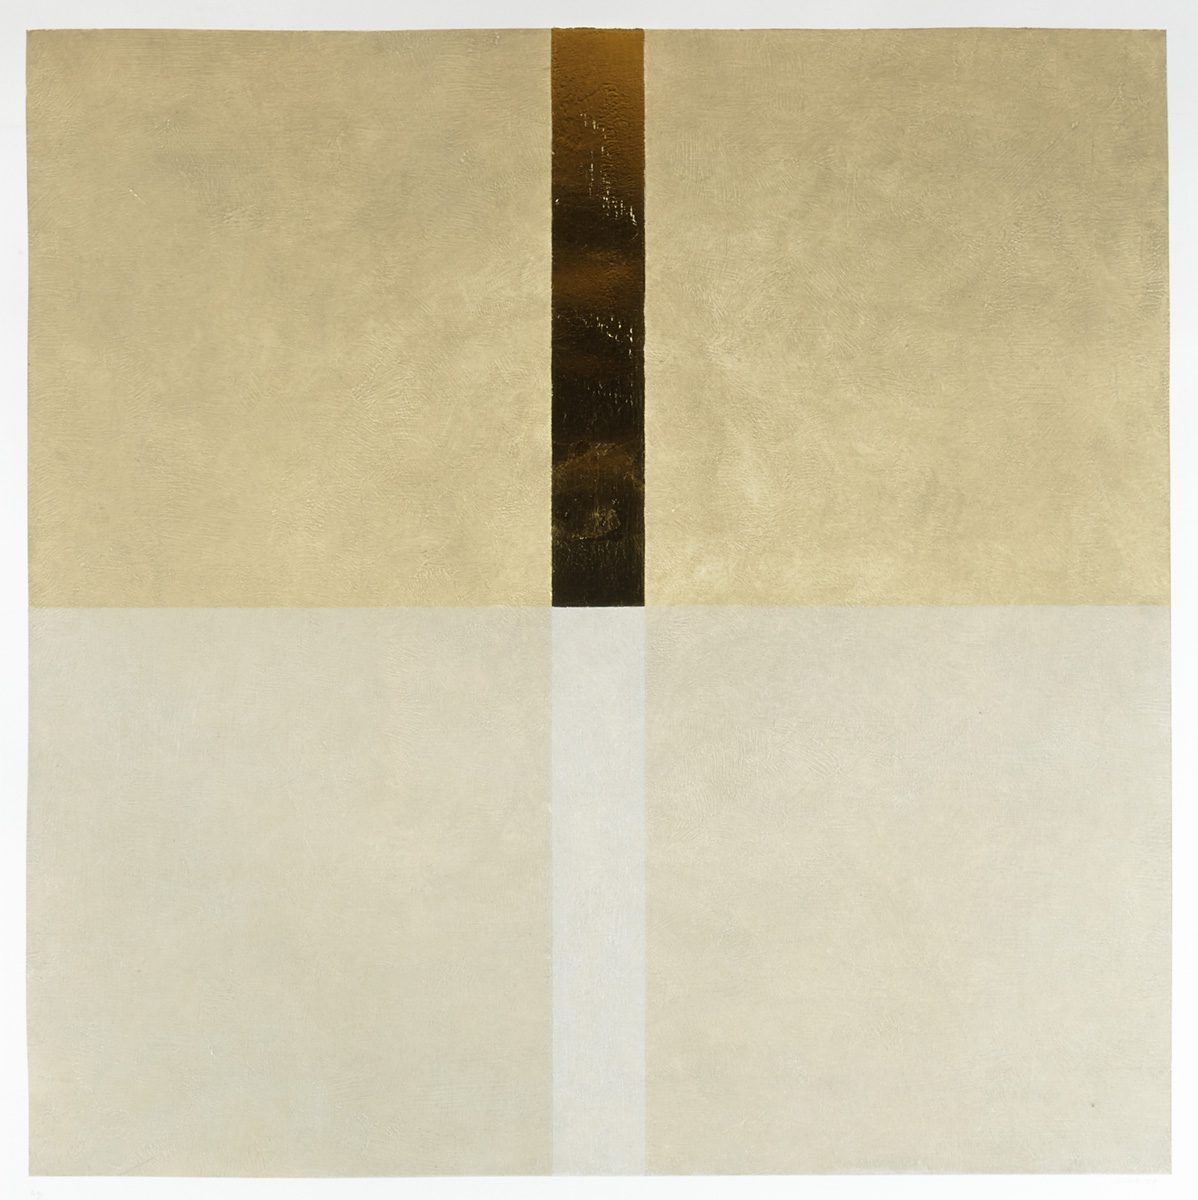 UNTITLED [TWIN LINES], 2004 by Patrick Scott sold for 2,200 at Whyte's Auctions